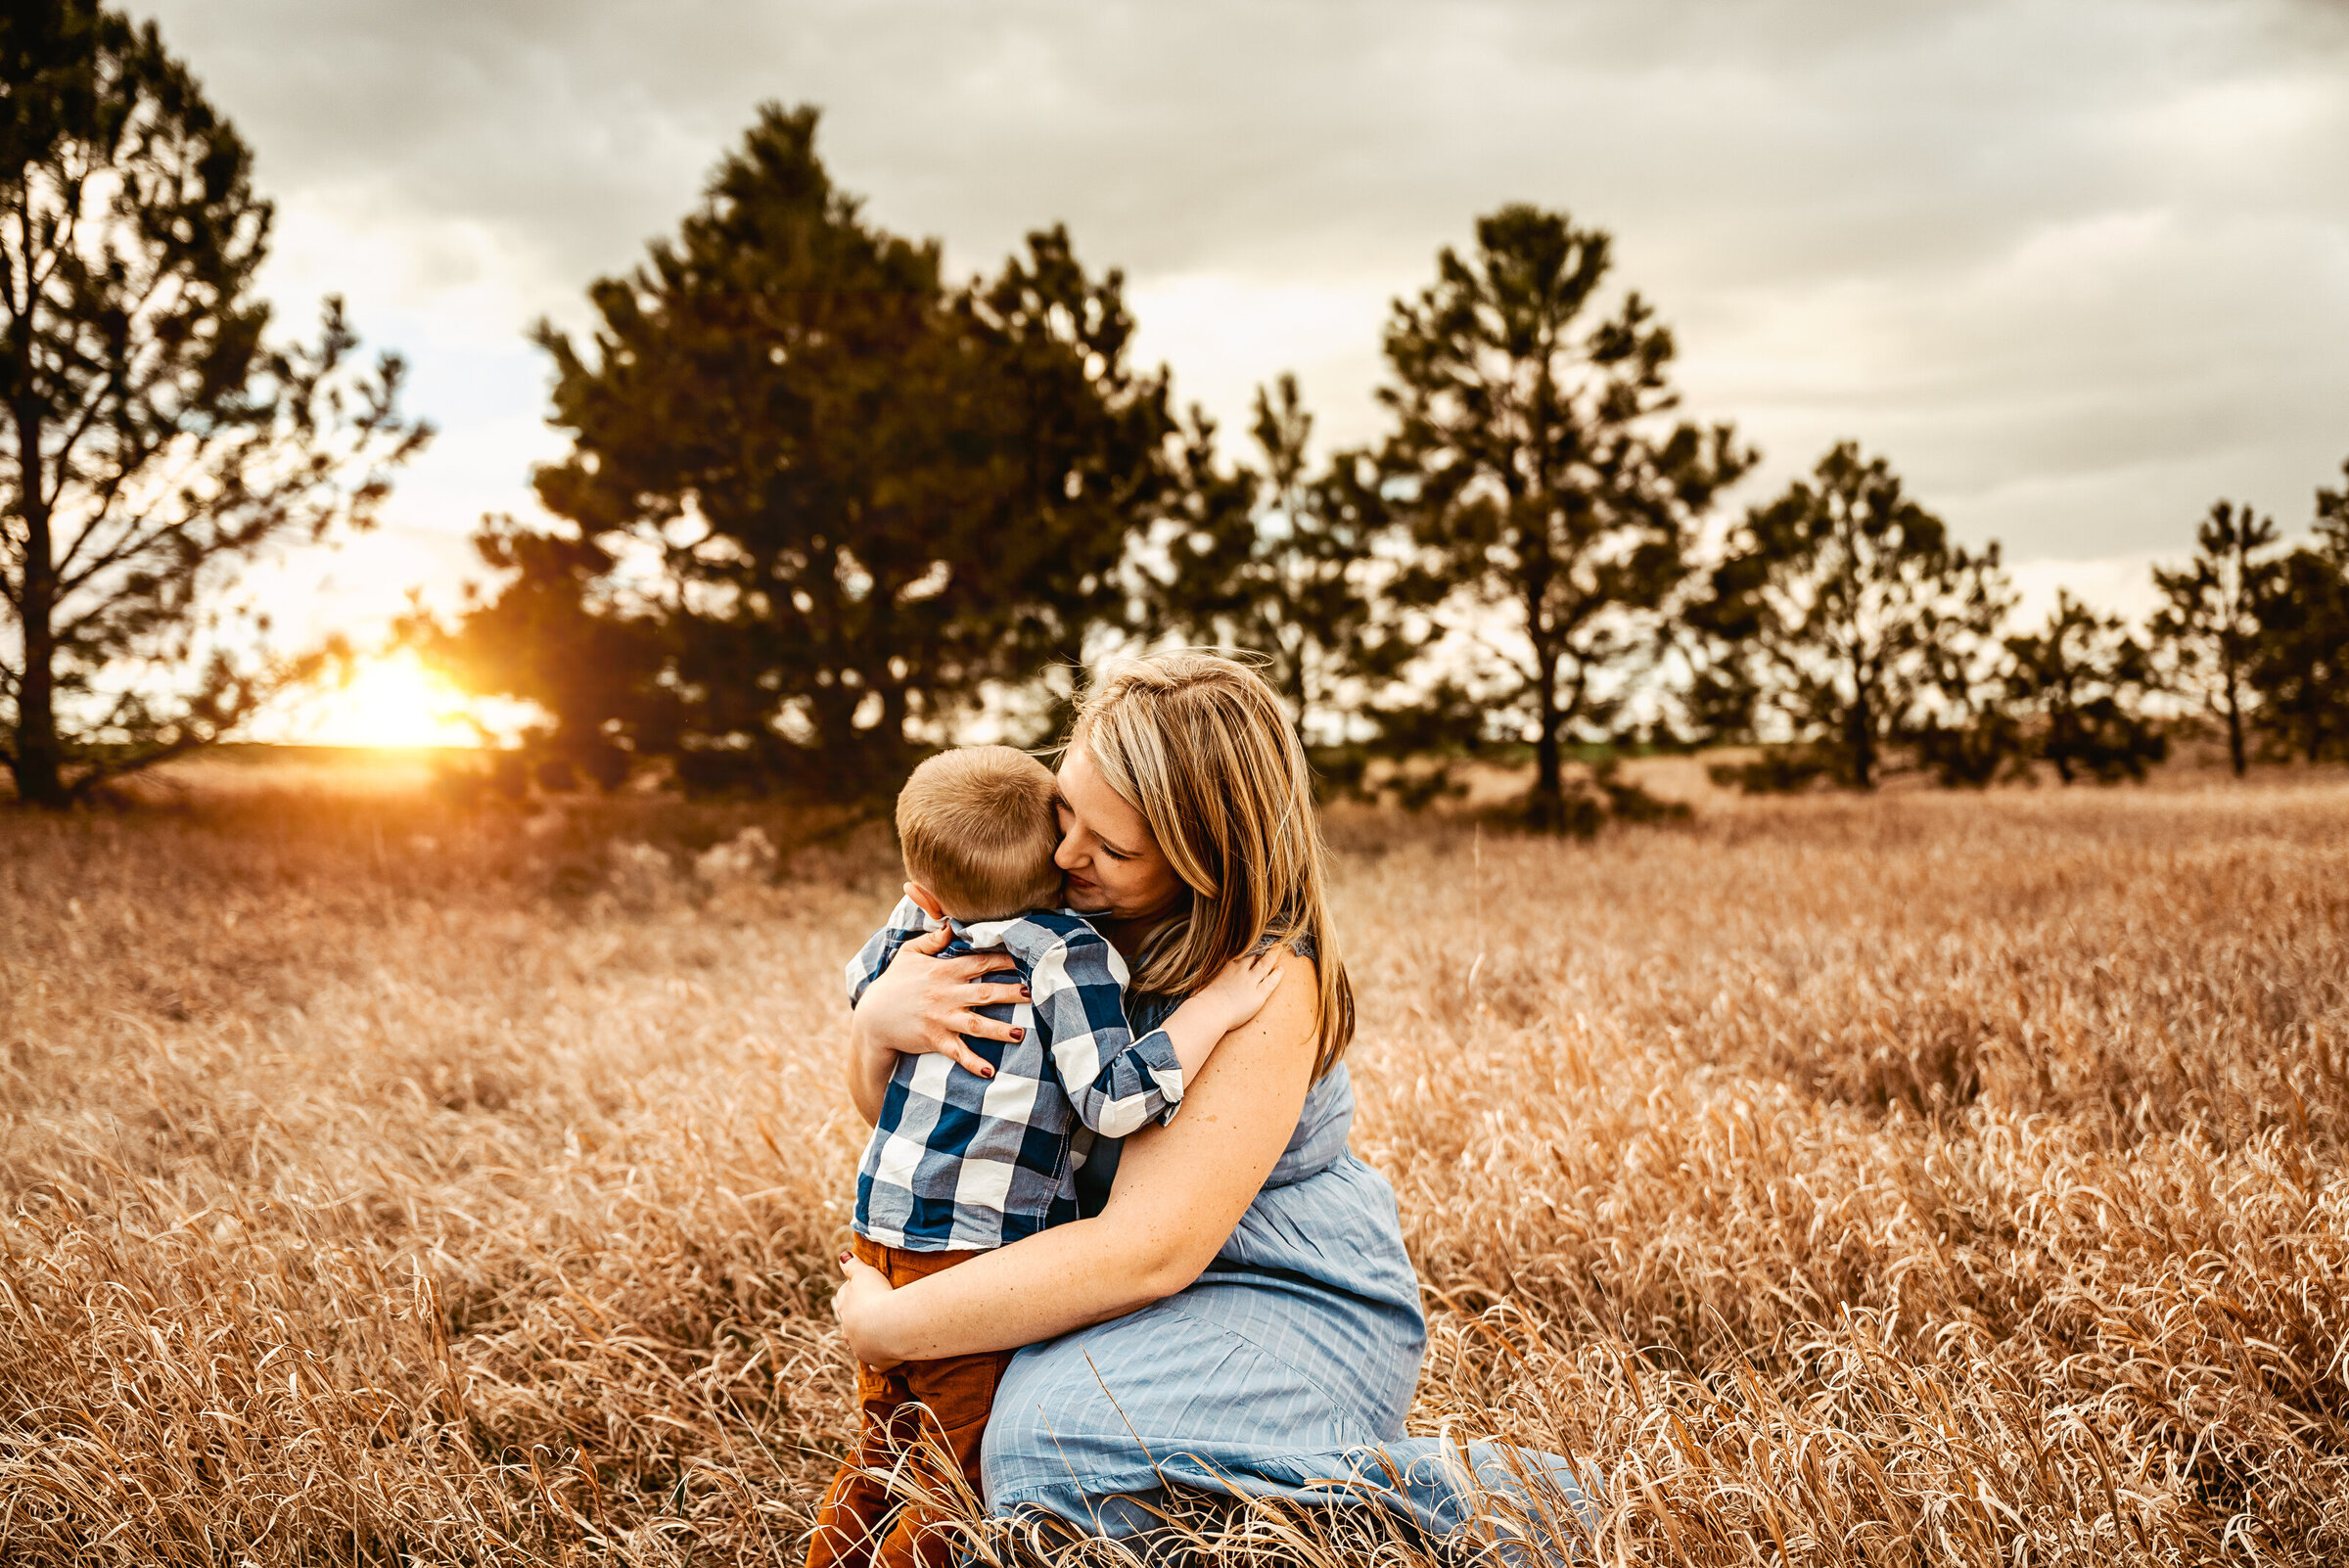 Mom and son hug each other while sitting on the ground with open field and trees